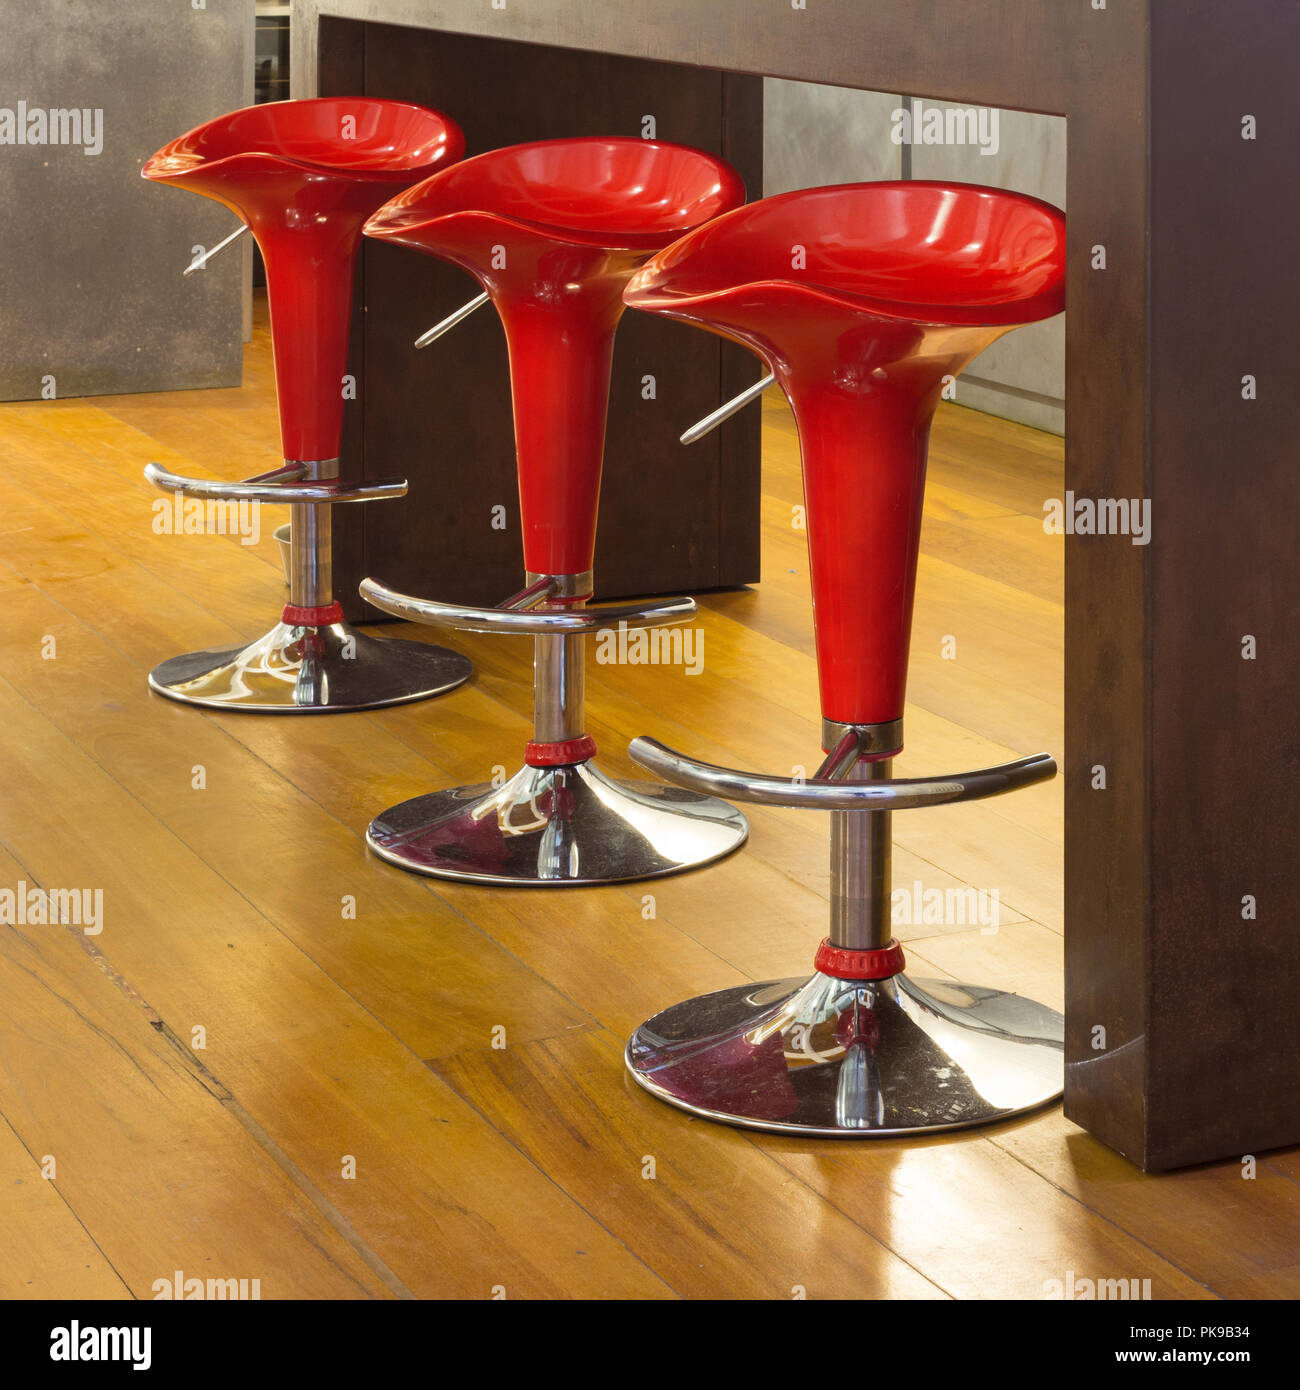 Interior of modern house, counter top with red stools, detail Stock Photo